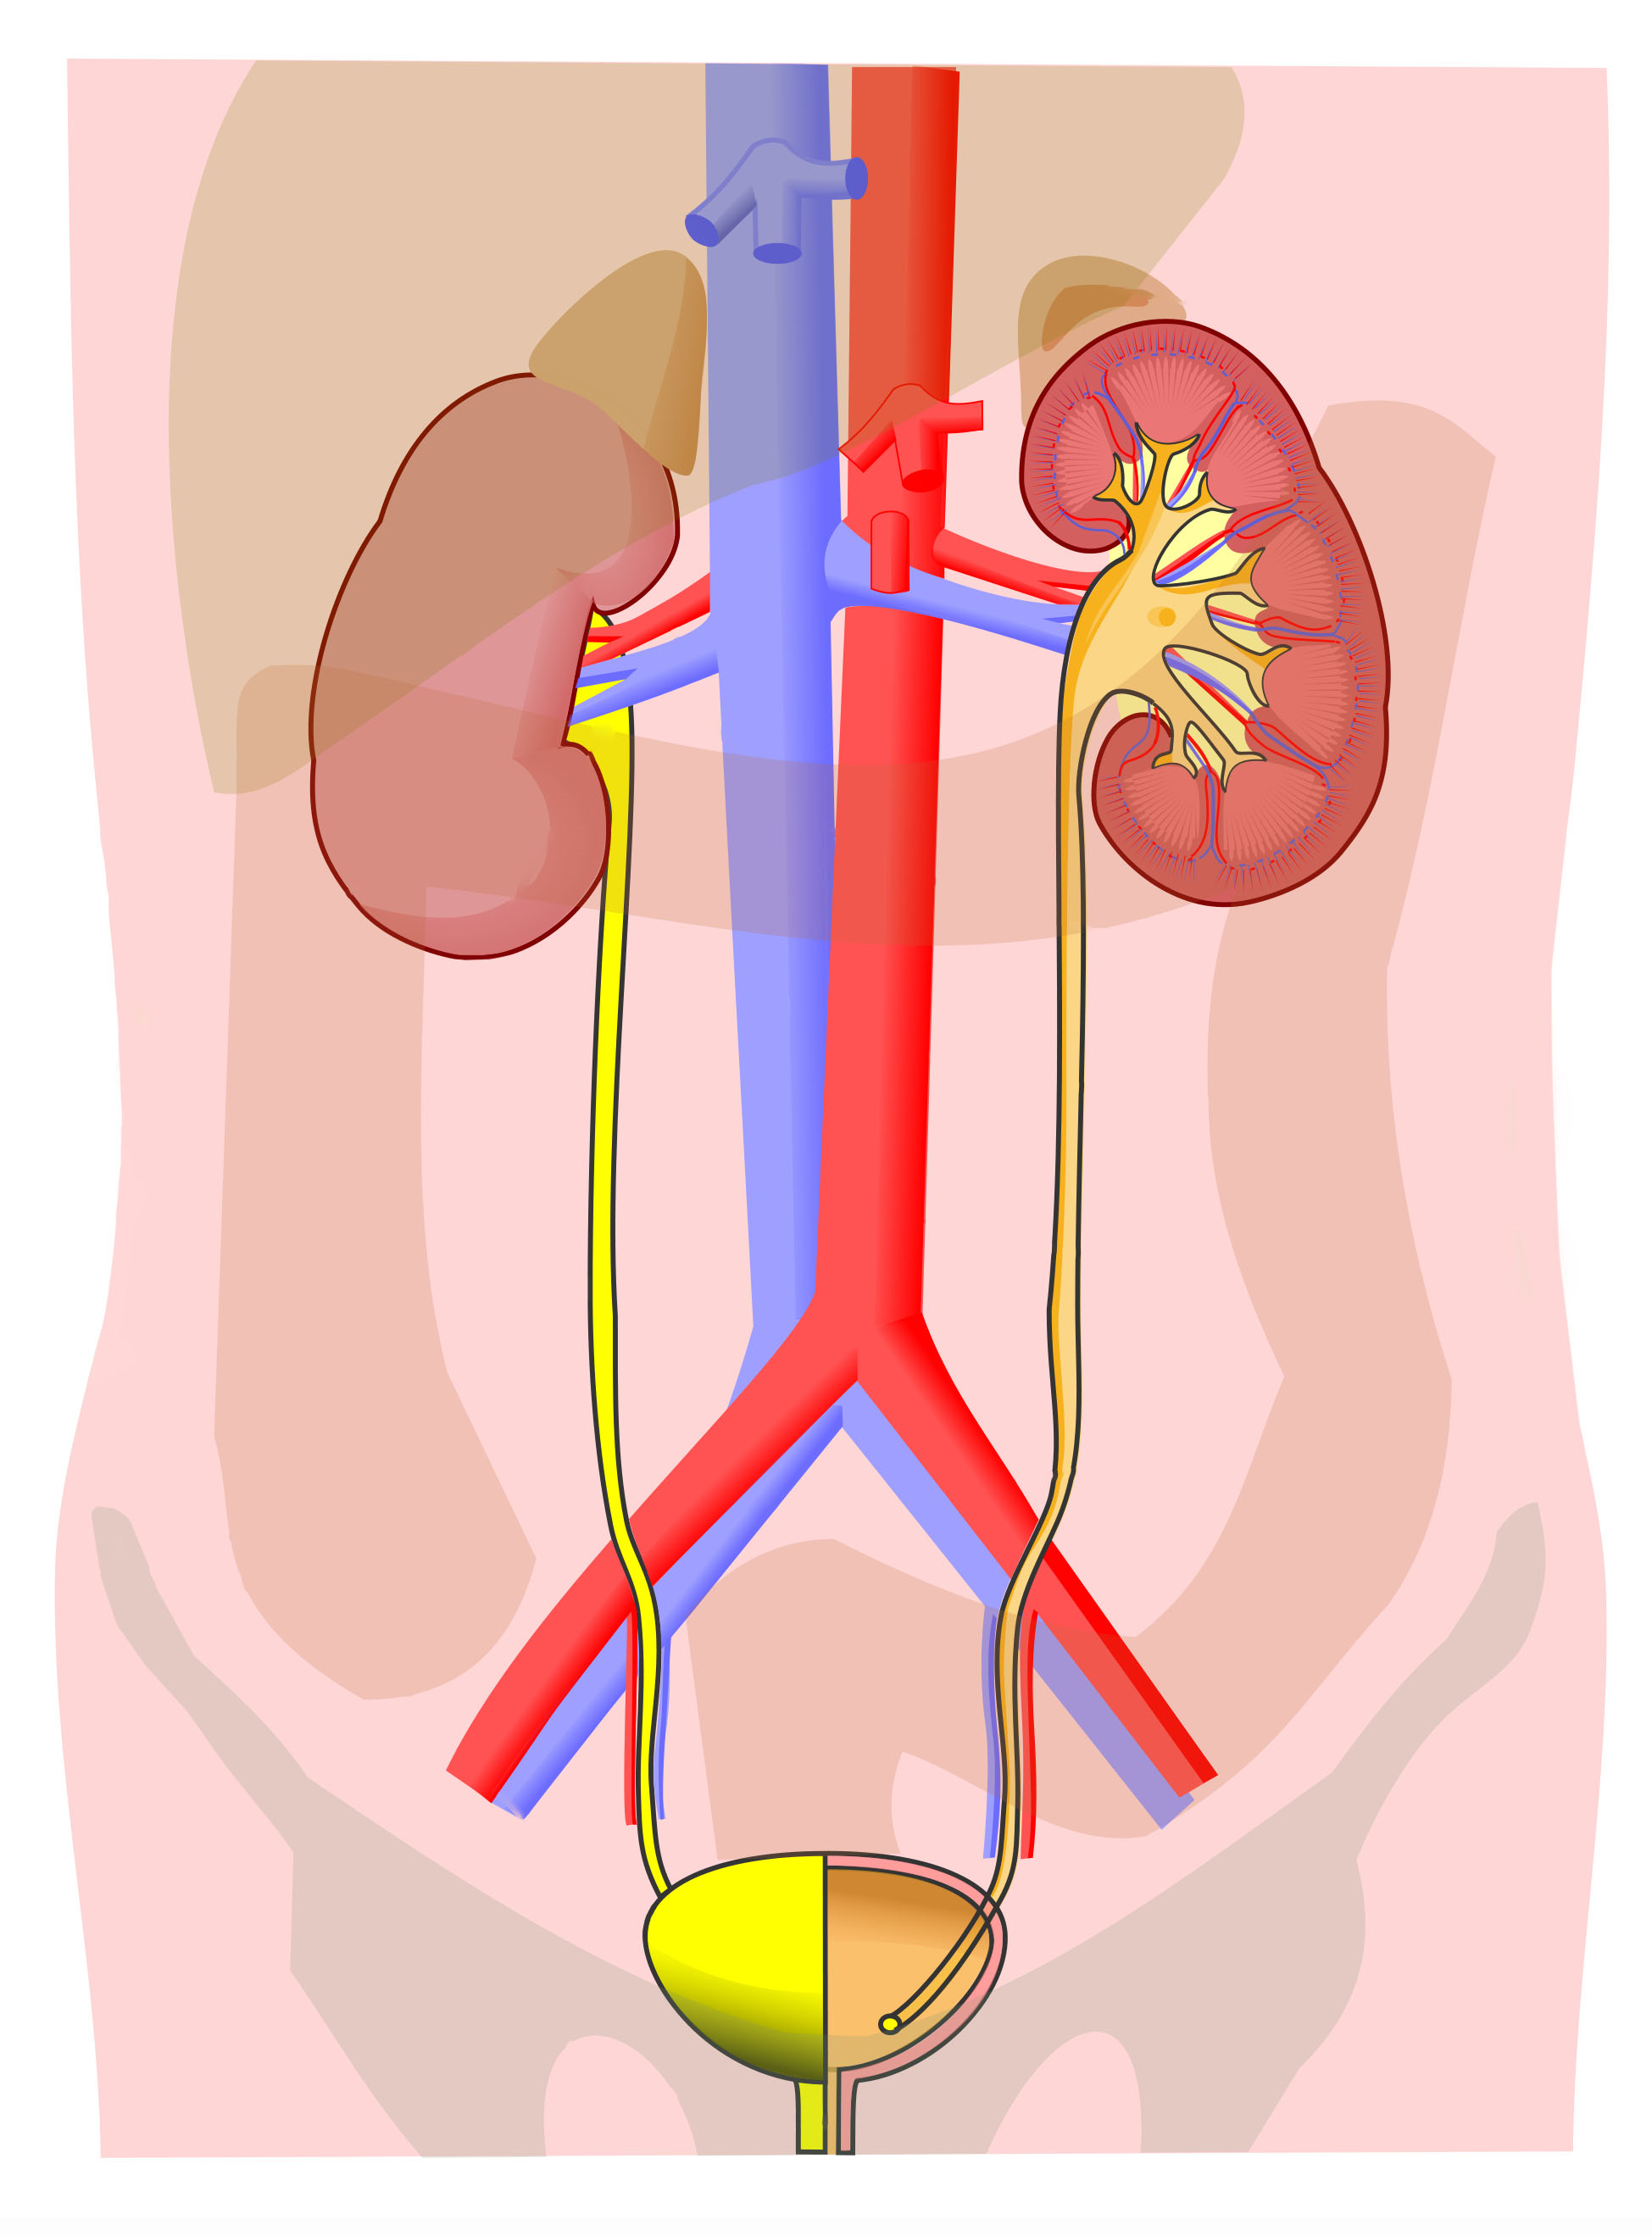 Urinary system diagram for labeling